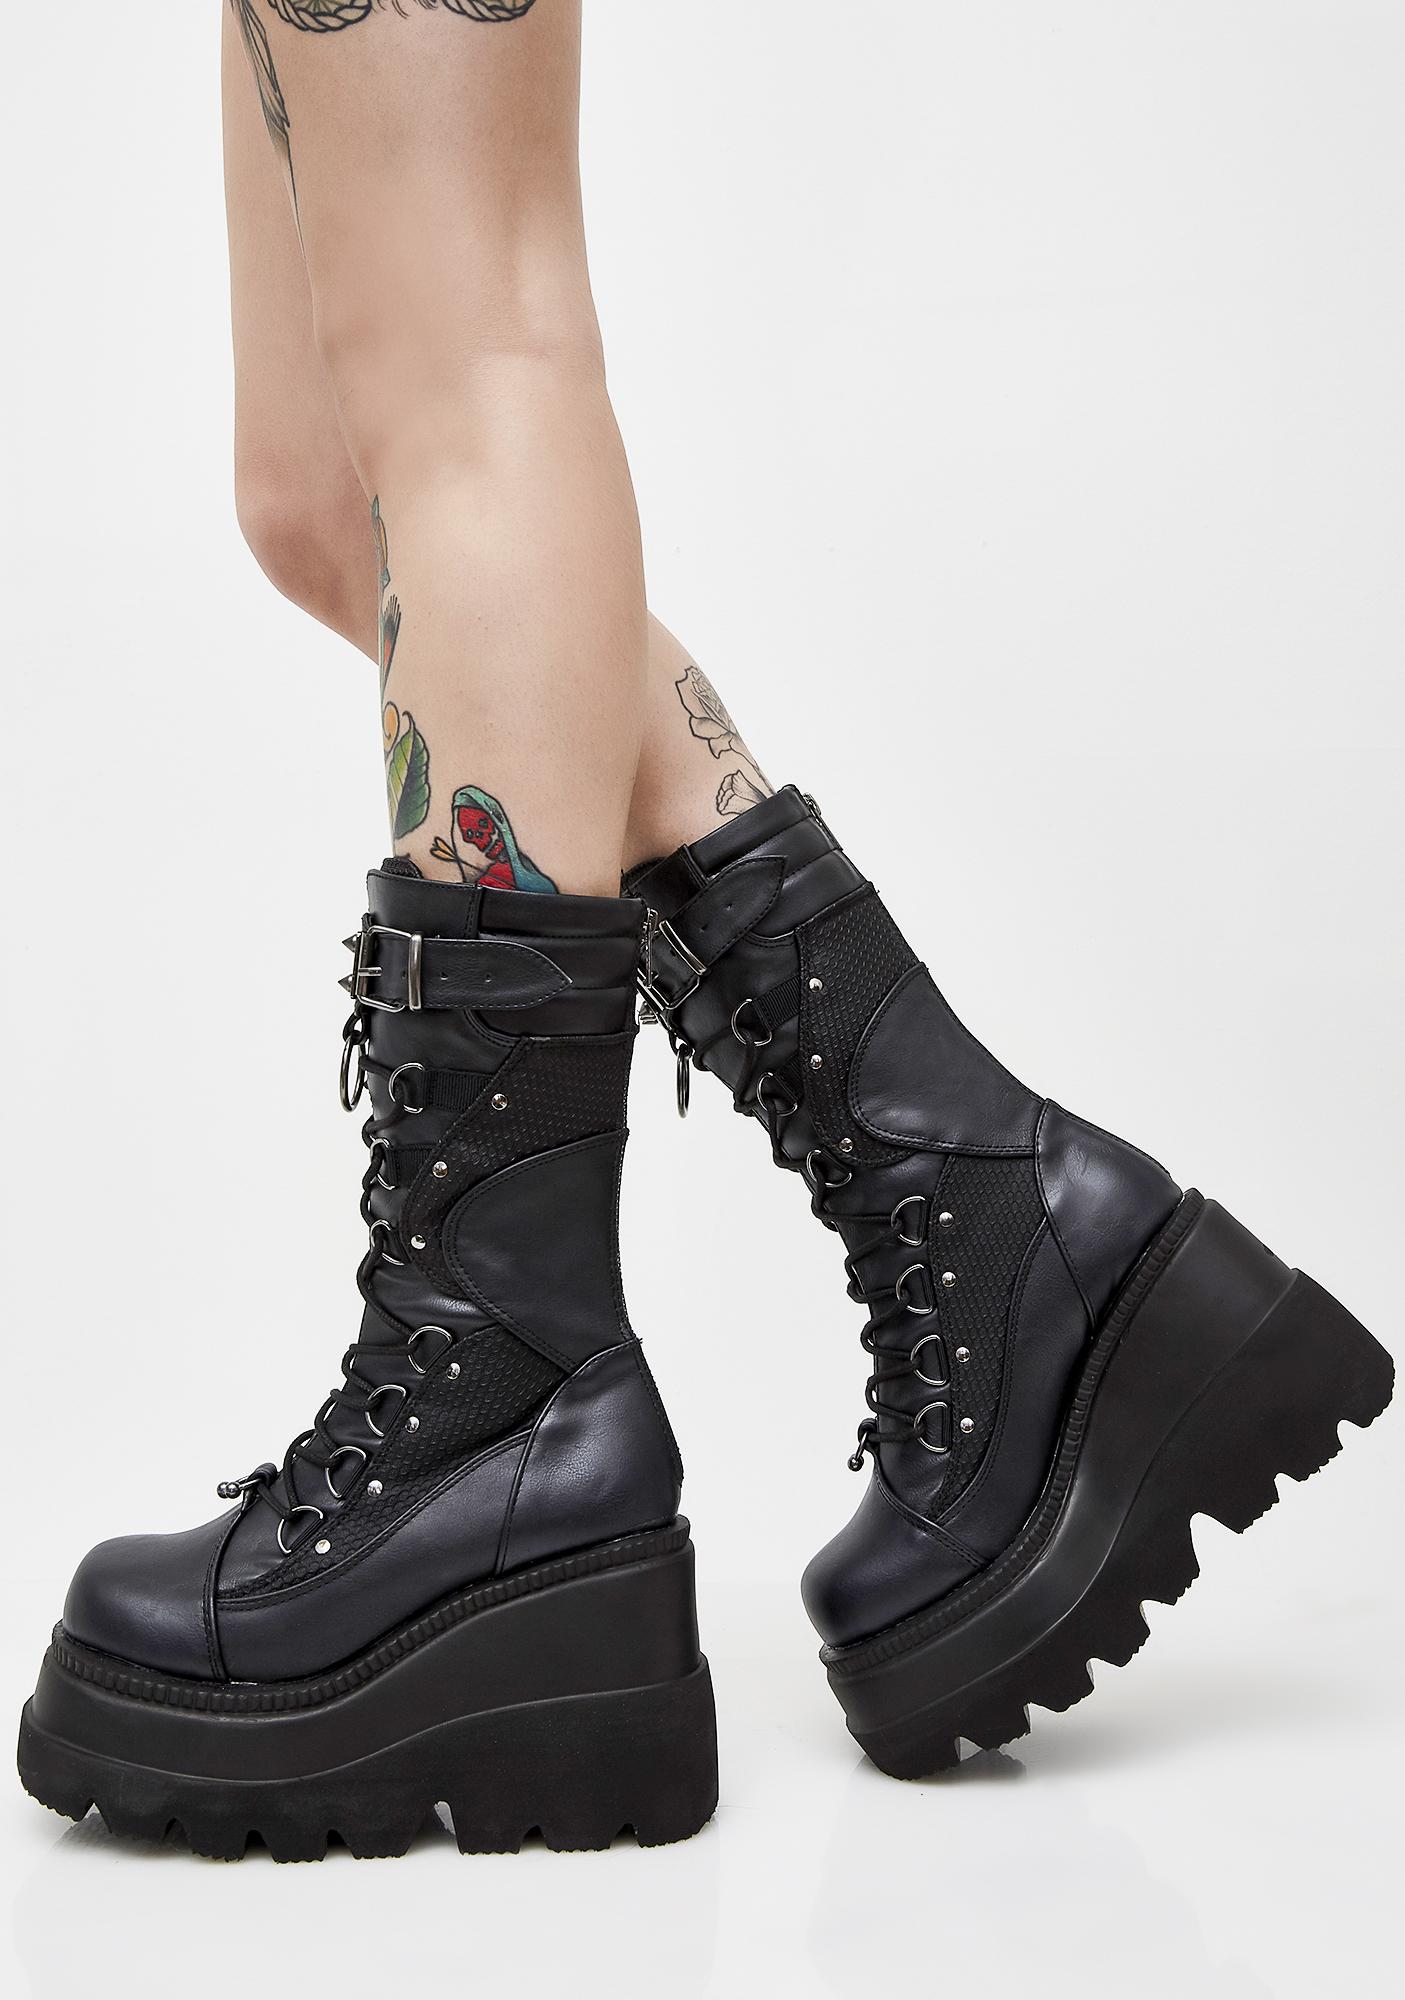 black high rise boots